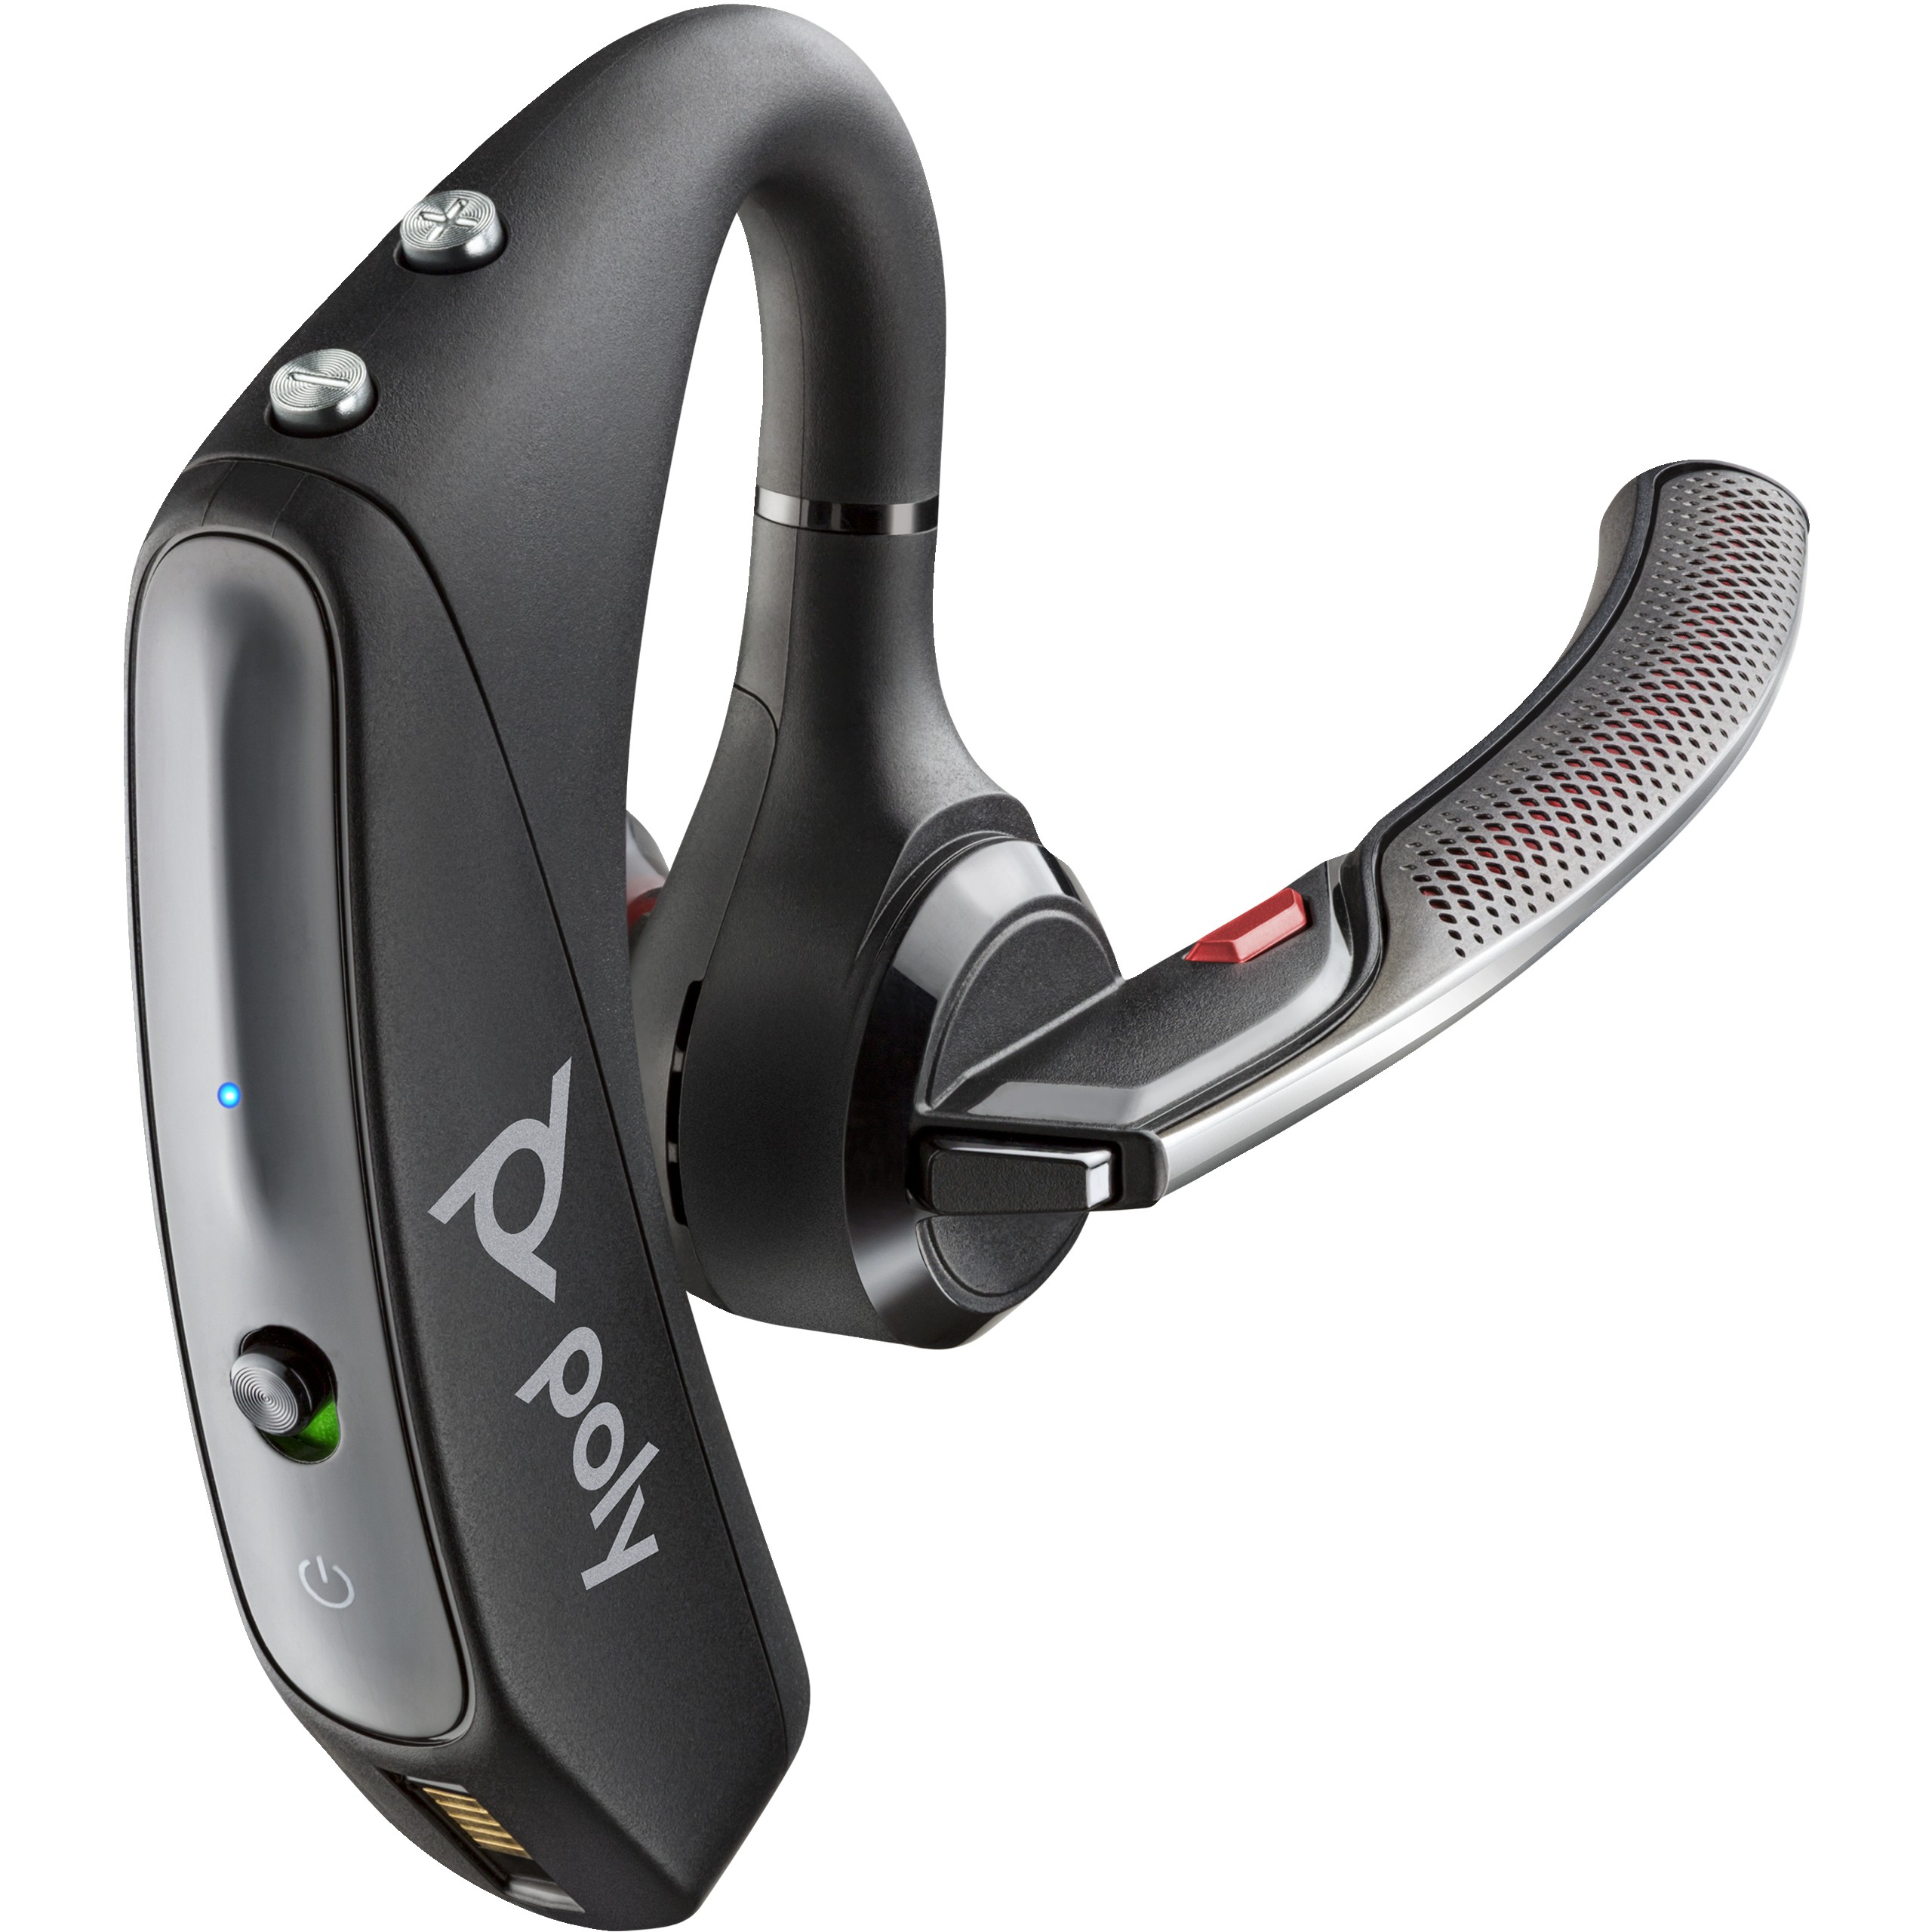 POLY Voyager 5200 USB-A Bluetooth Headset +BT700 dongle - 7K2F3AA